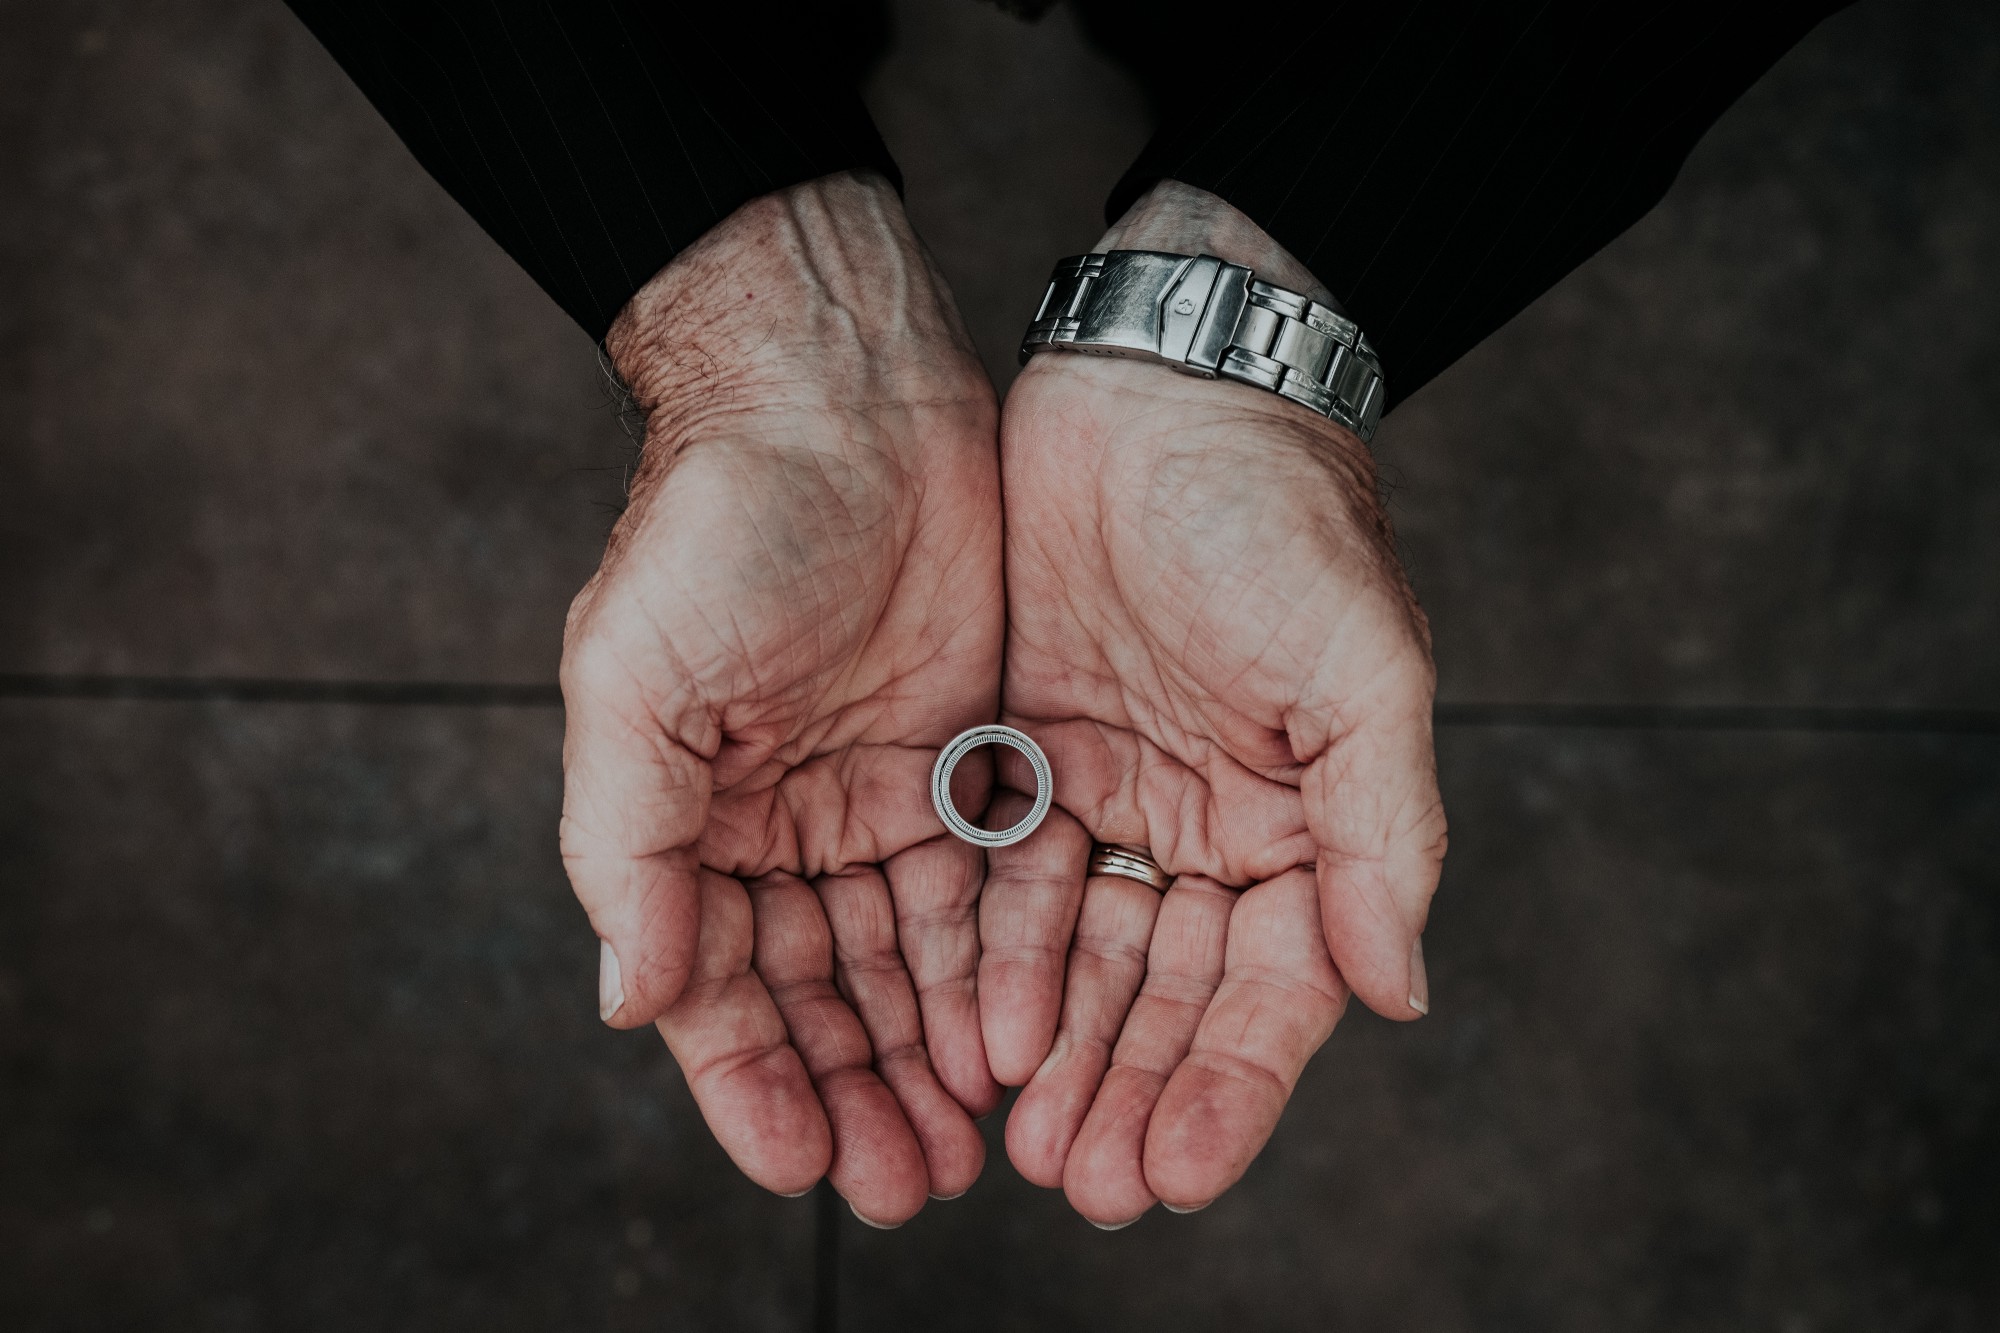 I shot this at a recent Fort Co.&nbsp;wedding, and I use it here with the newlyweds’ permission. Their grandfather made these wedding bands, by hand, with no prior knowledge of ring-making. He told me it was all a labor of love.